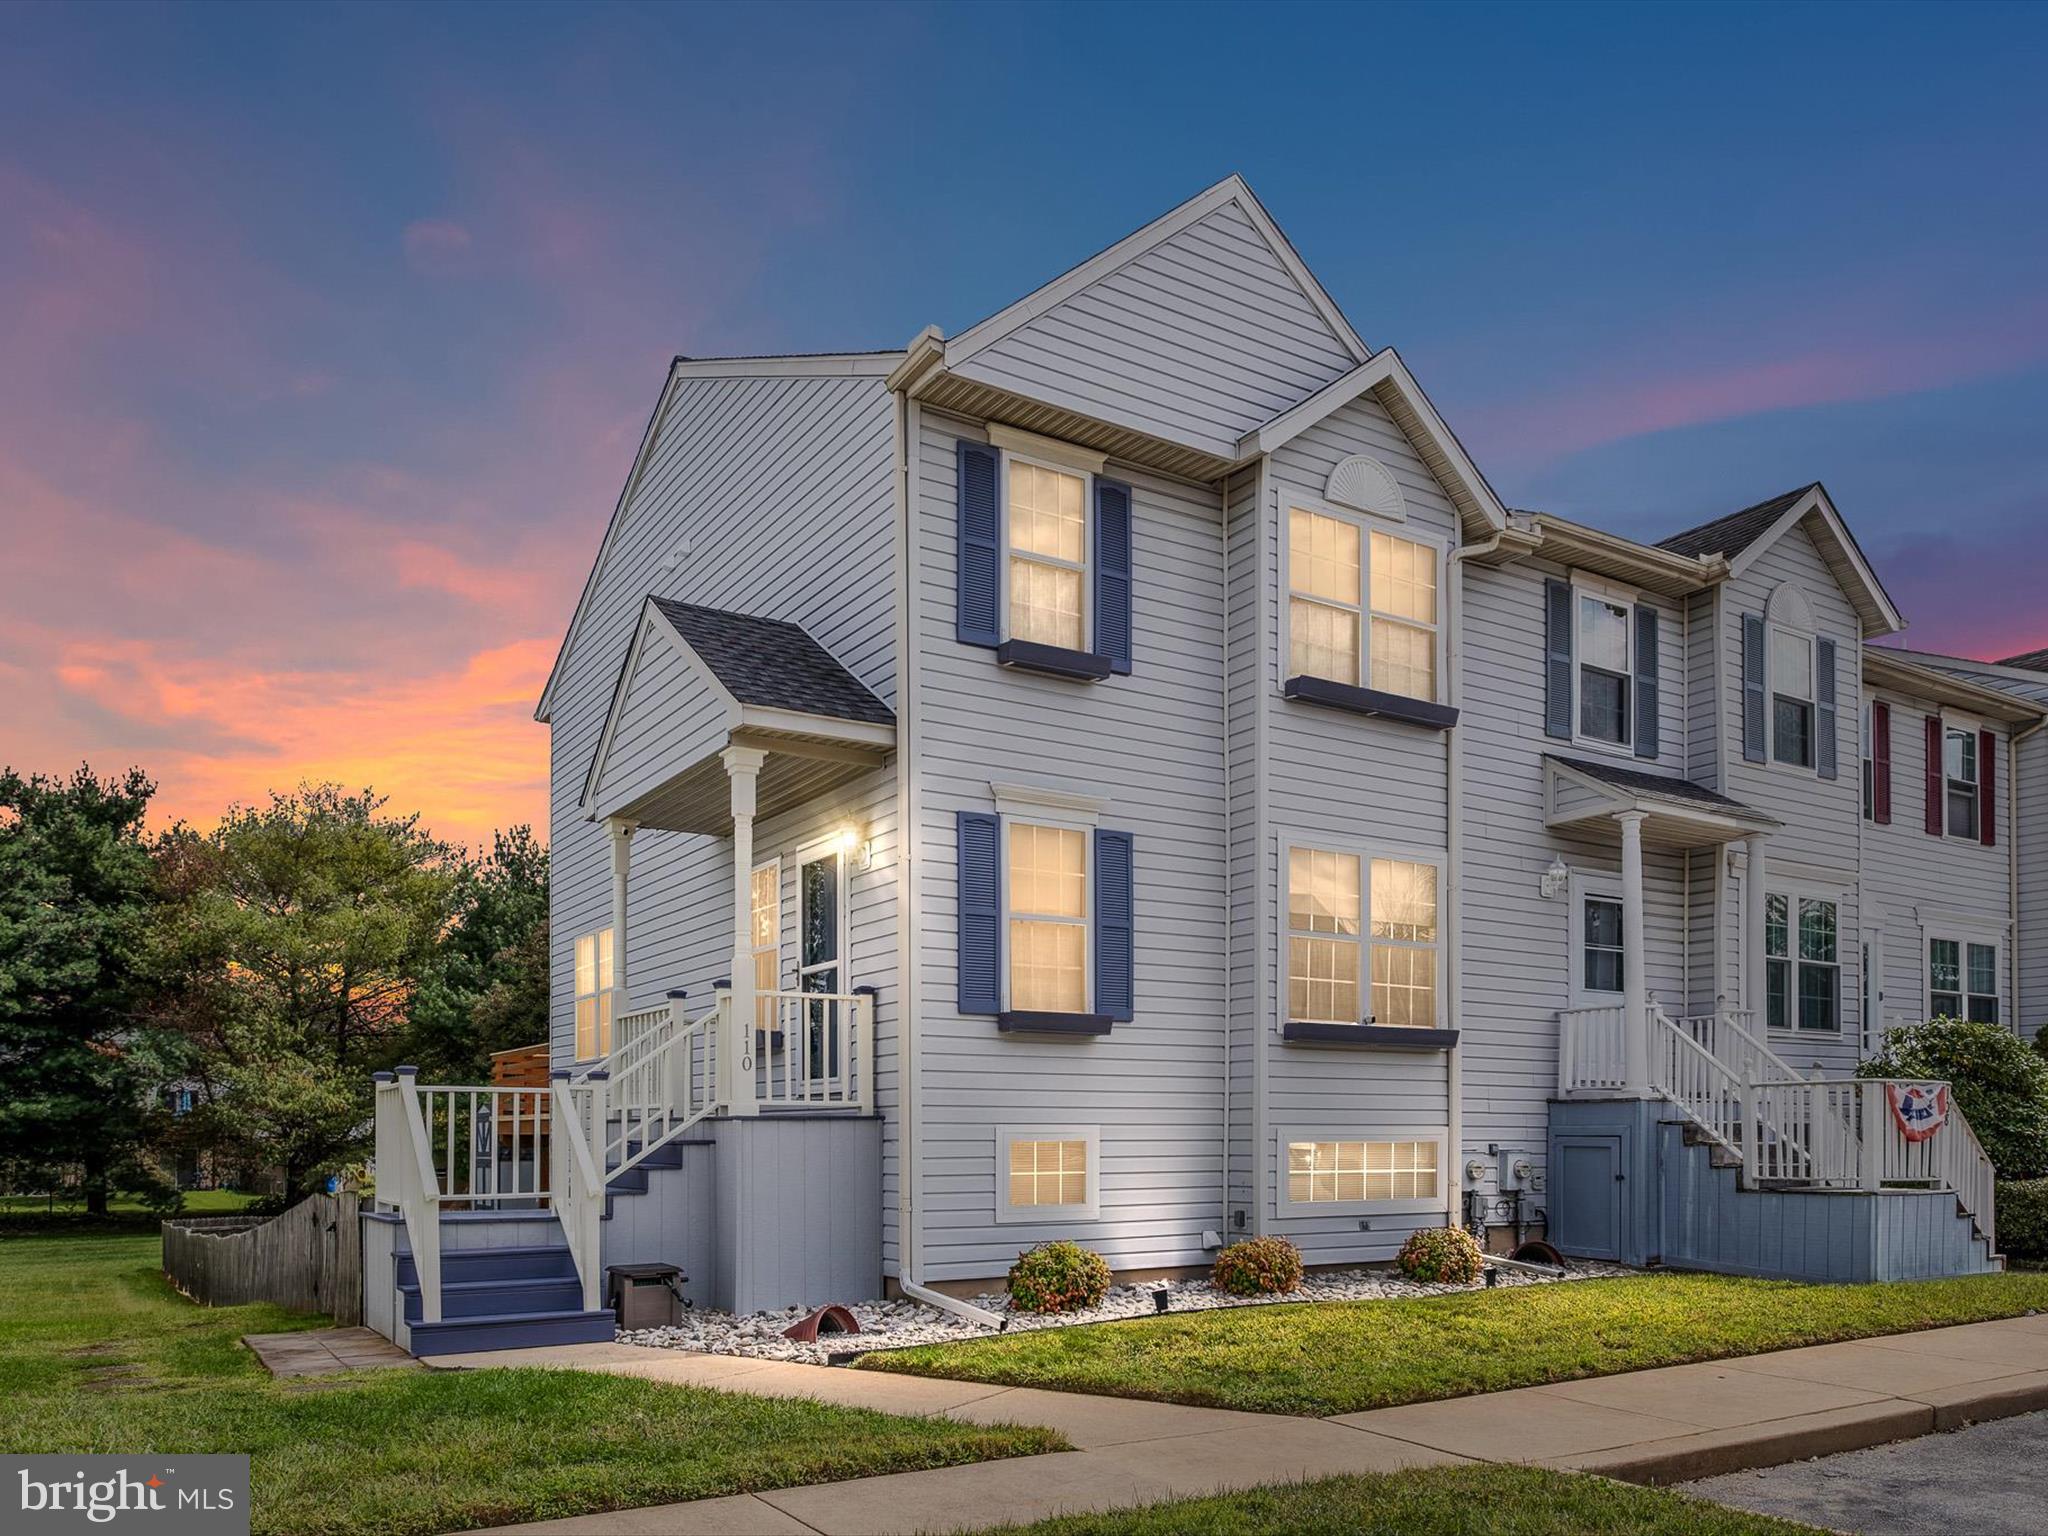 A stunning end unit townhome that offers the perfect combination of comfort, style, and convenience.